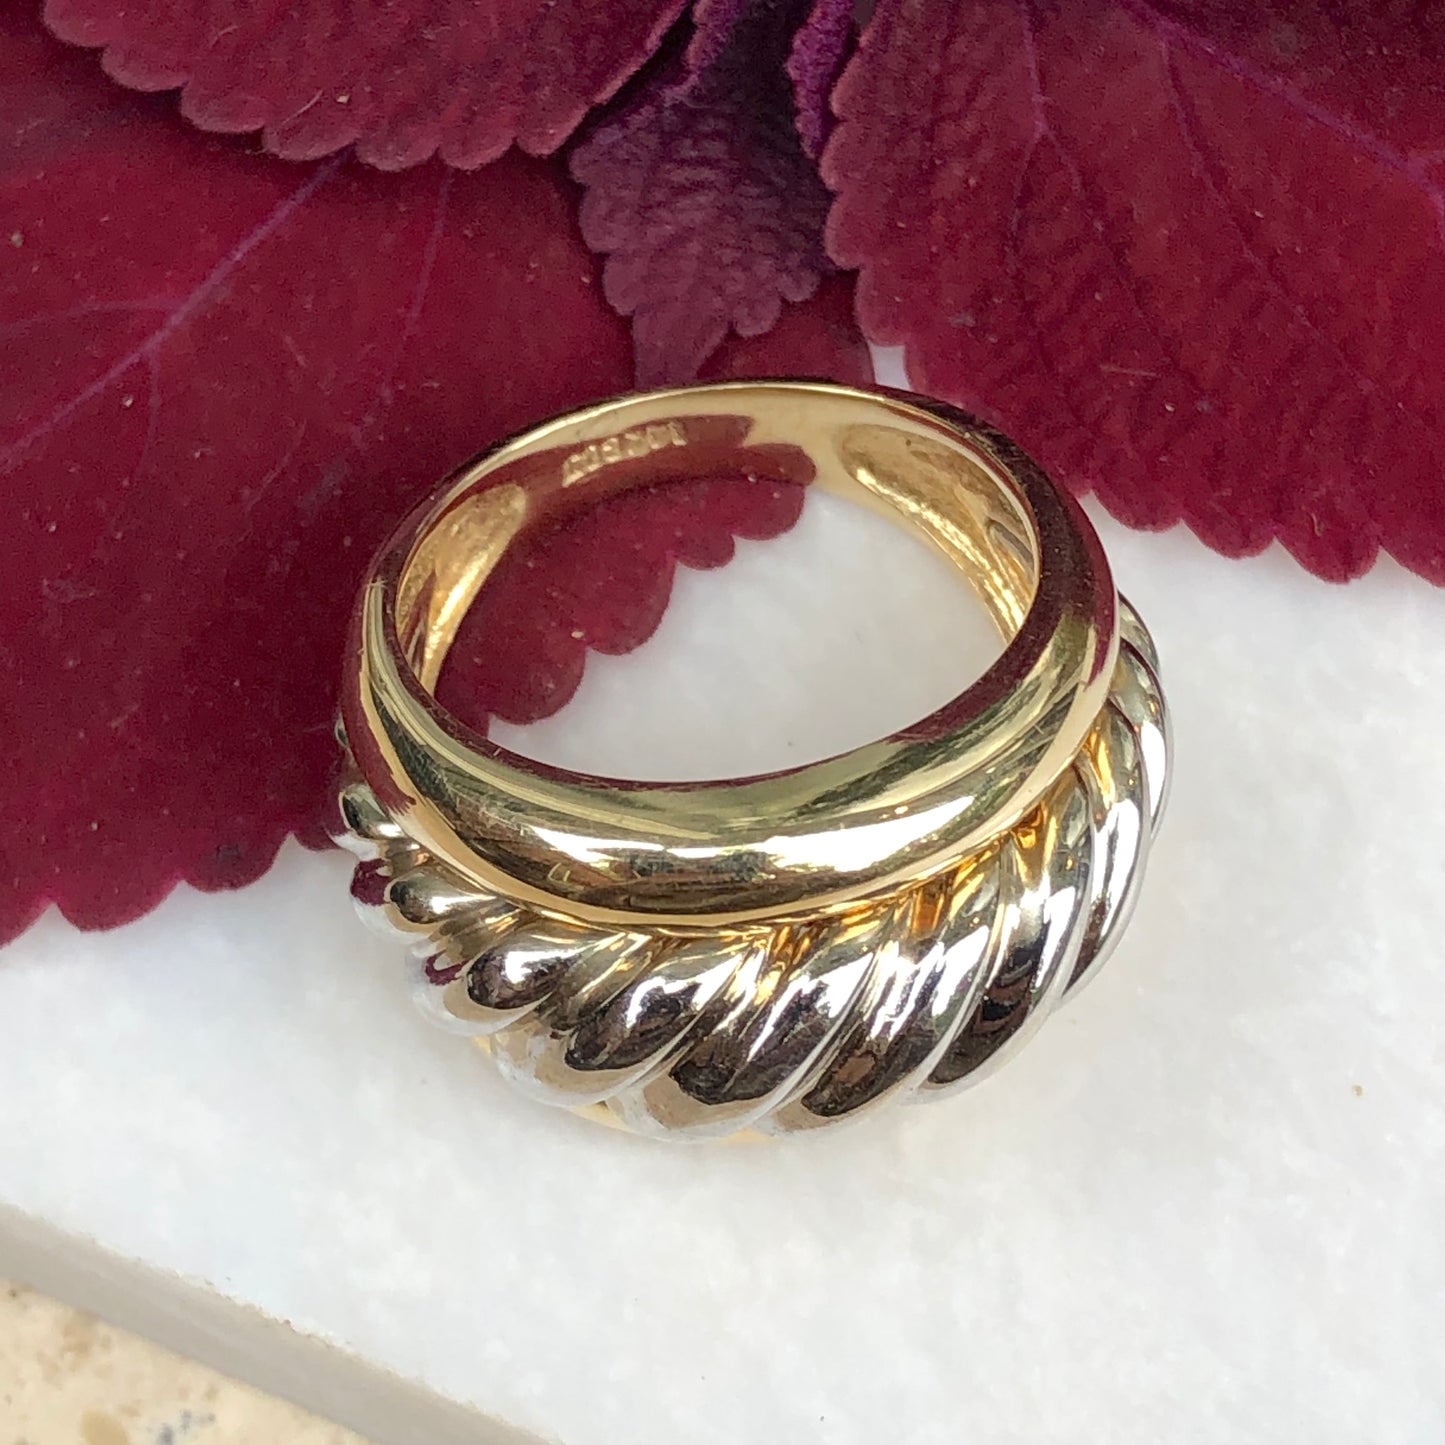 14KT Yellow Gold + White Gold Ribbed Cigar Band Ring Size 7.5, 14KT Yellow Gold + White Gold Ribbed Cigar Band Ring Size 7.5 - Legacy Saint Jewelry